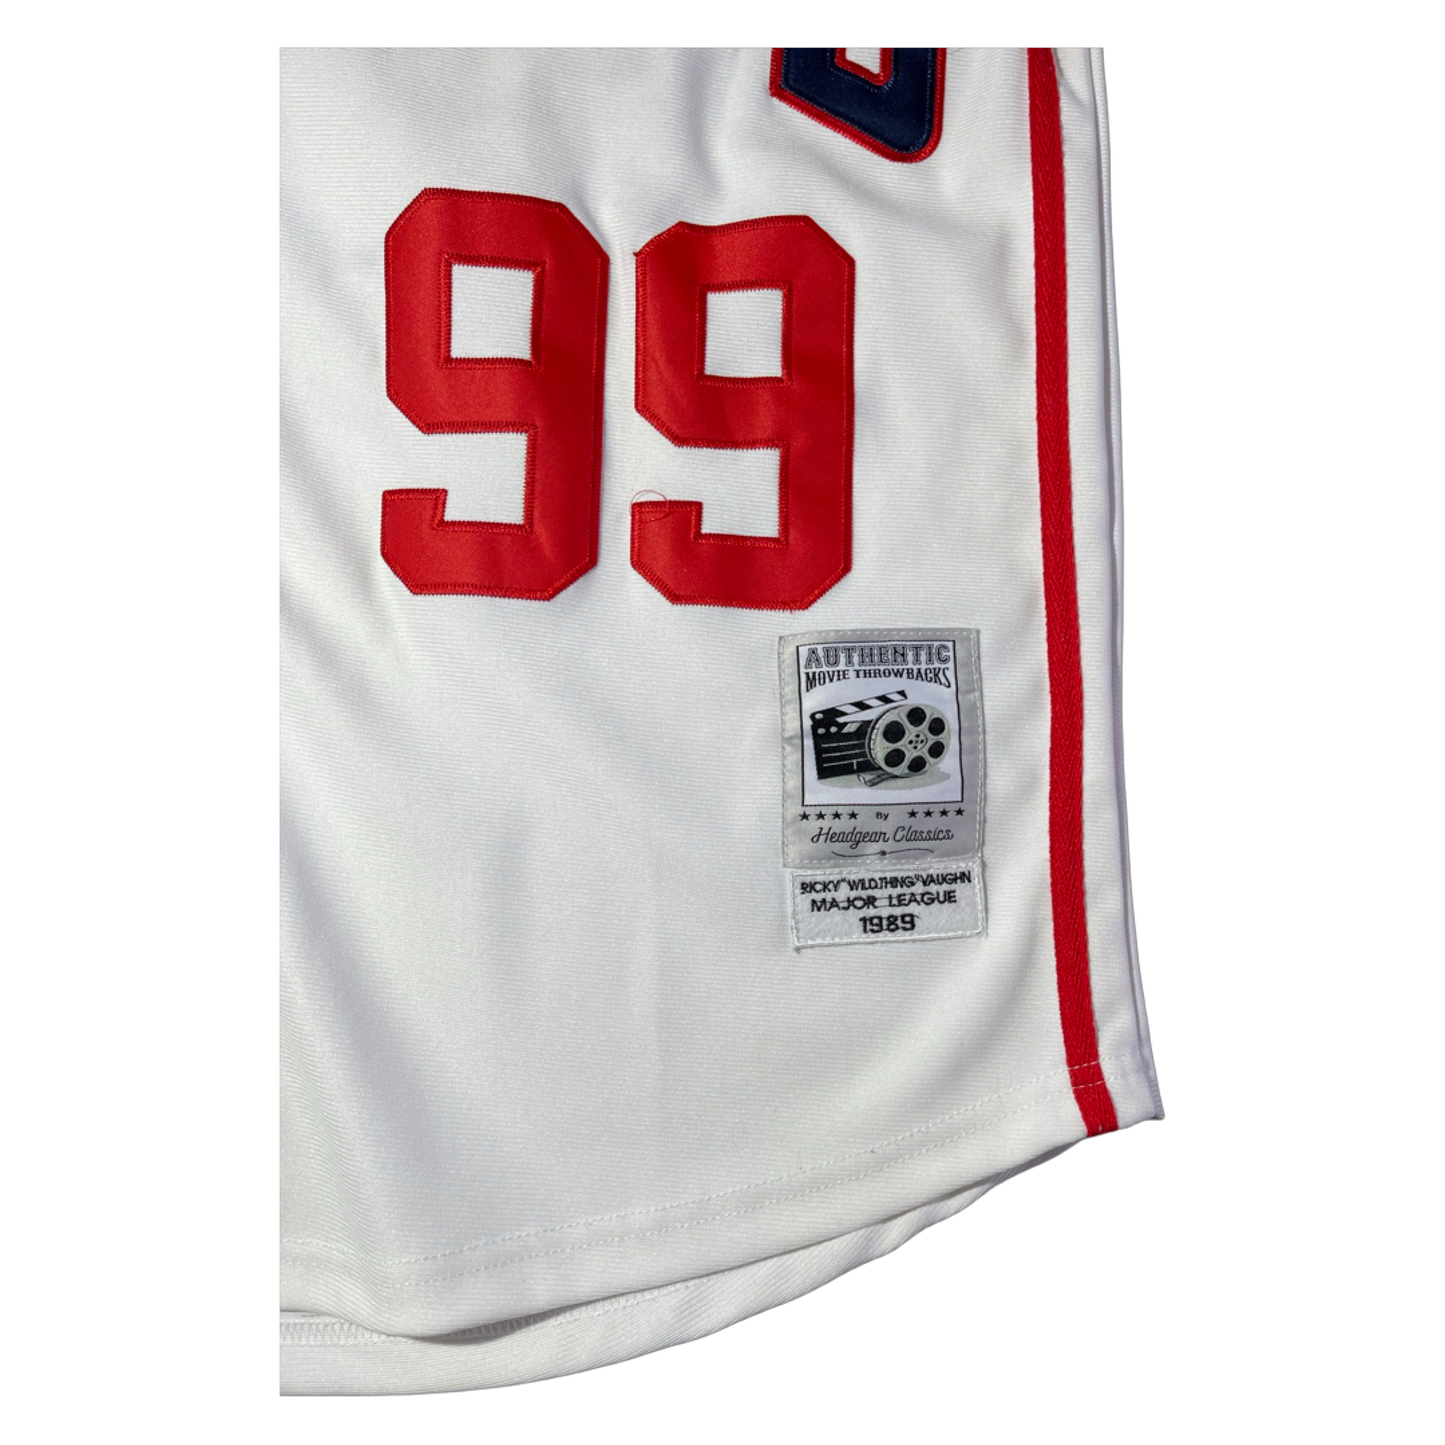 Ricky Vaughn Men's Cleveland Guardians Home Jersey - White Authentic